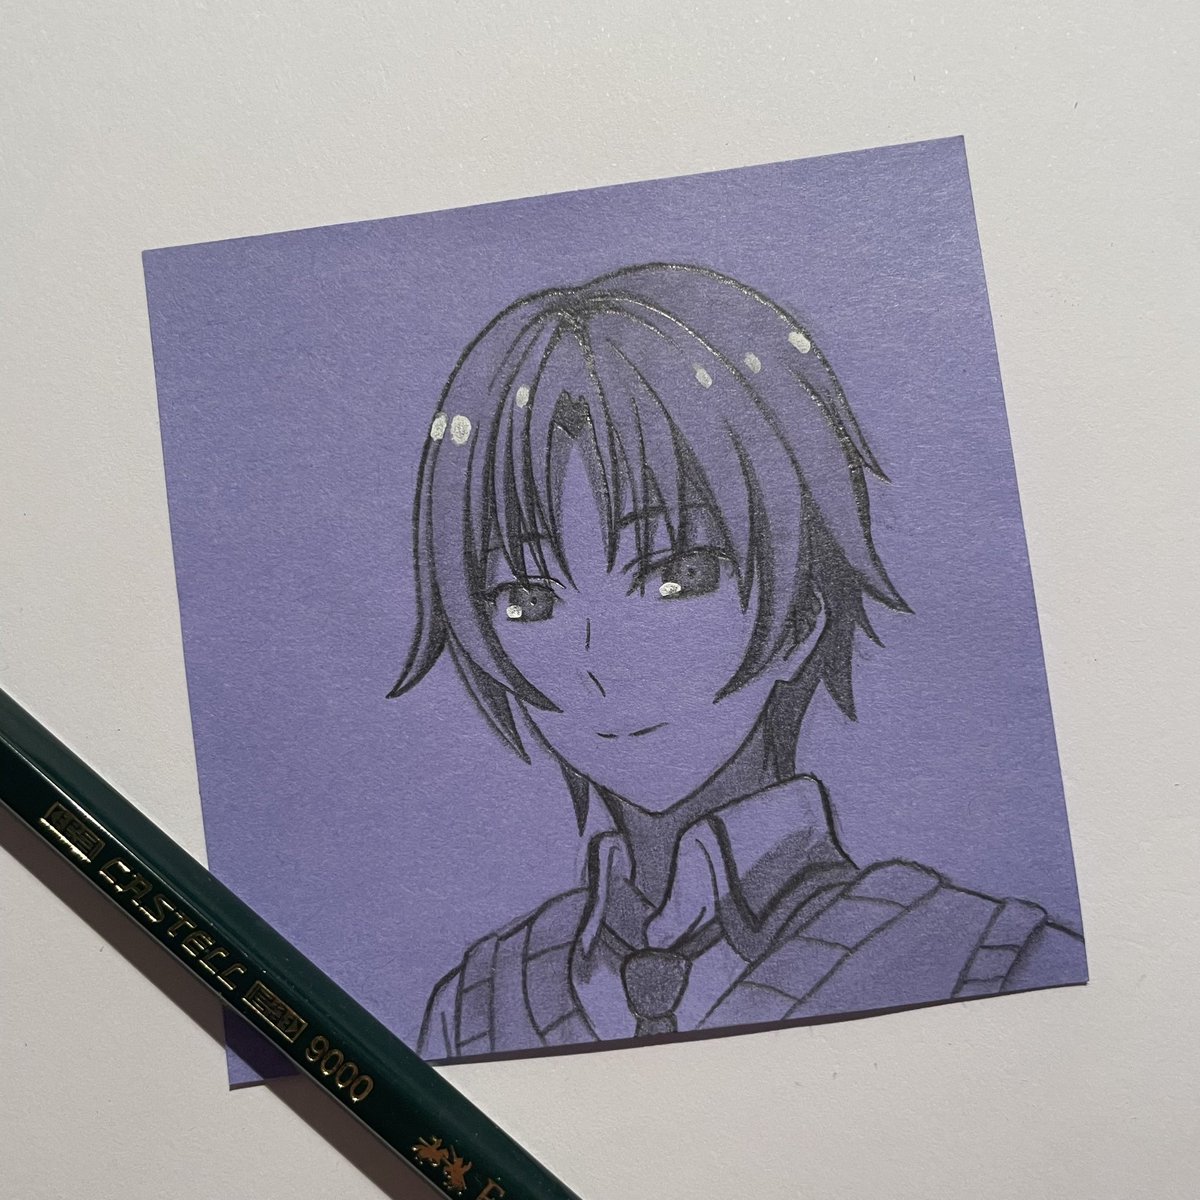 New sticky note drawing✨

#shindo #animeart #anime #art #pencil #pencilart #drawing #artist